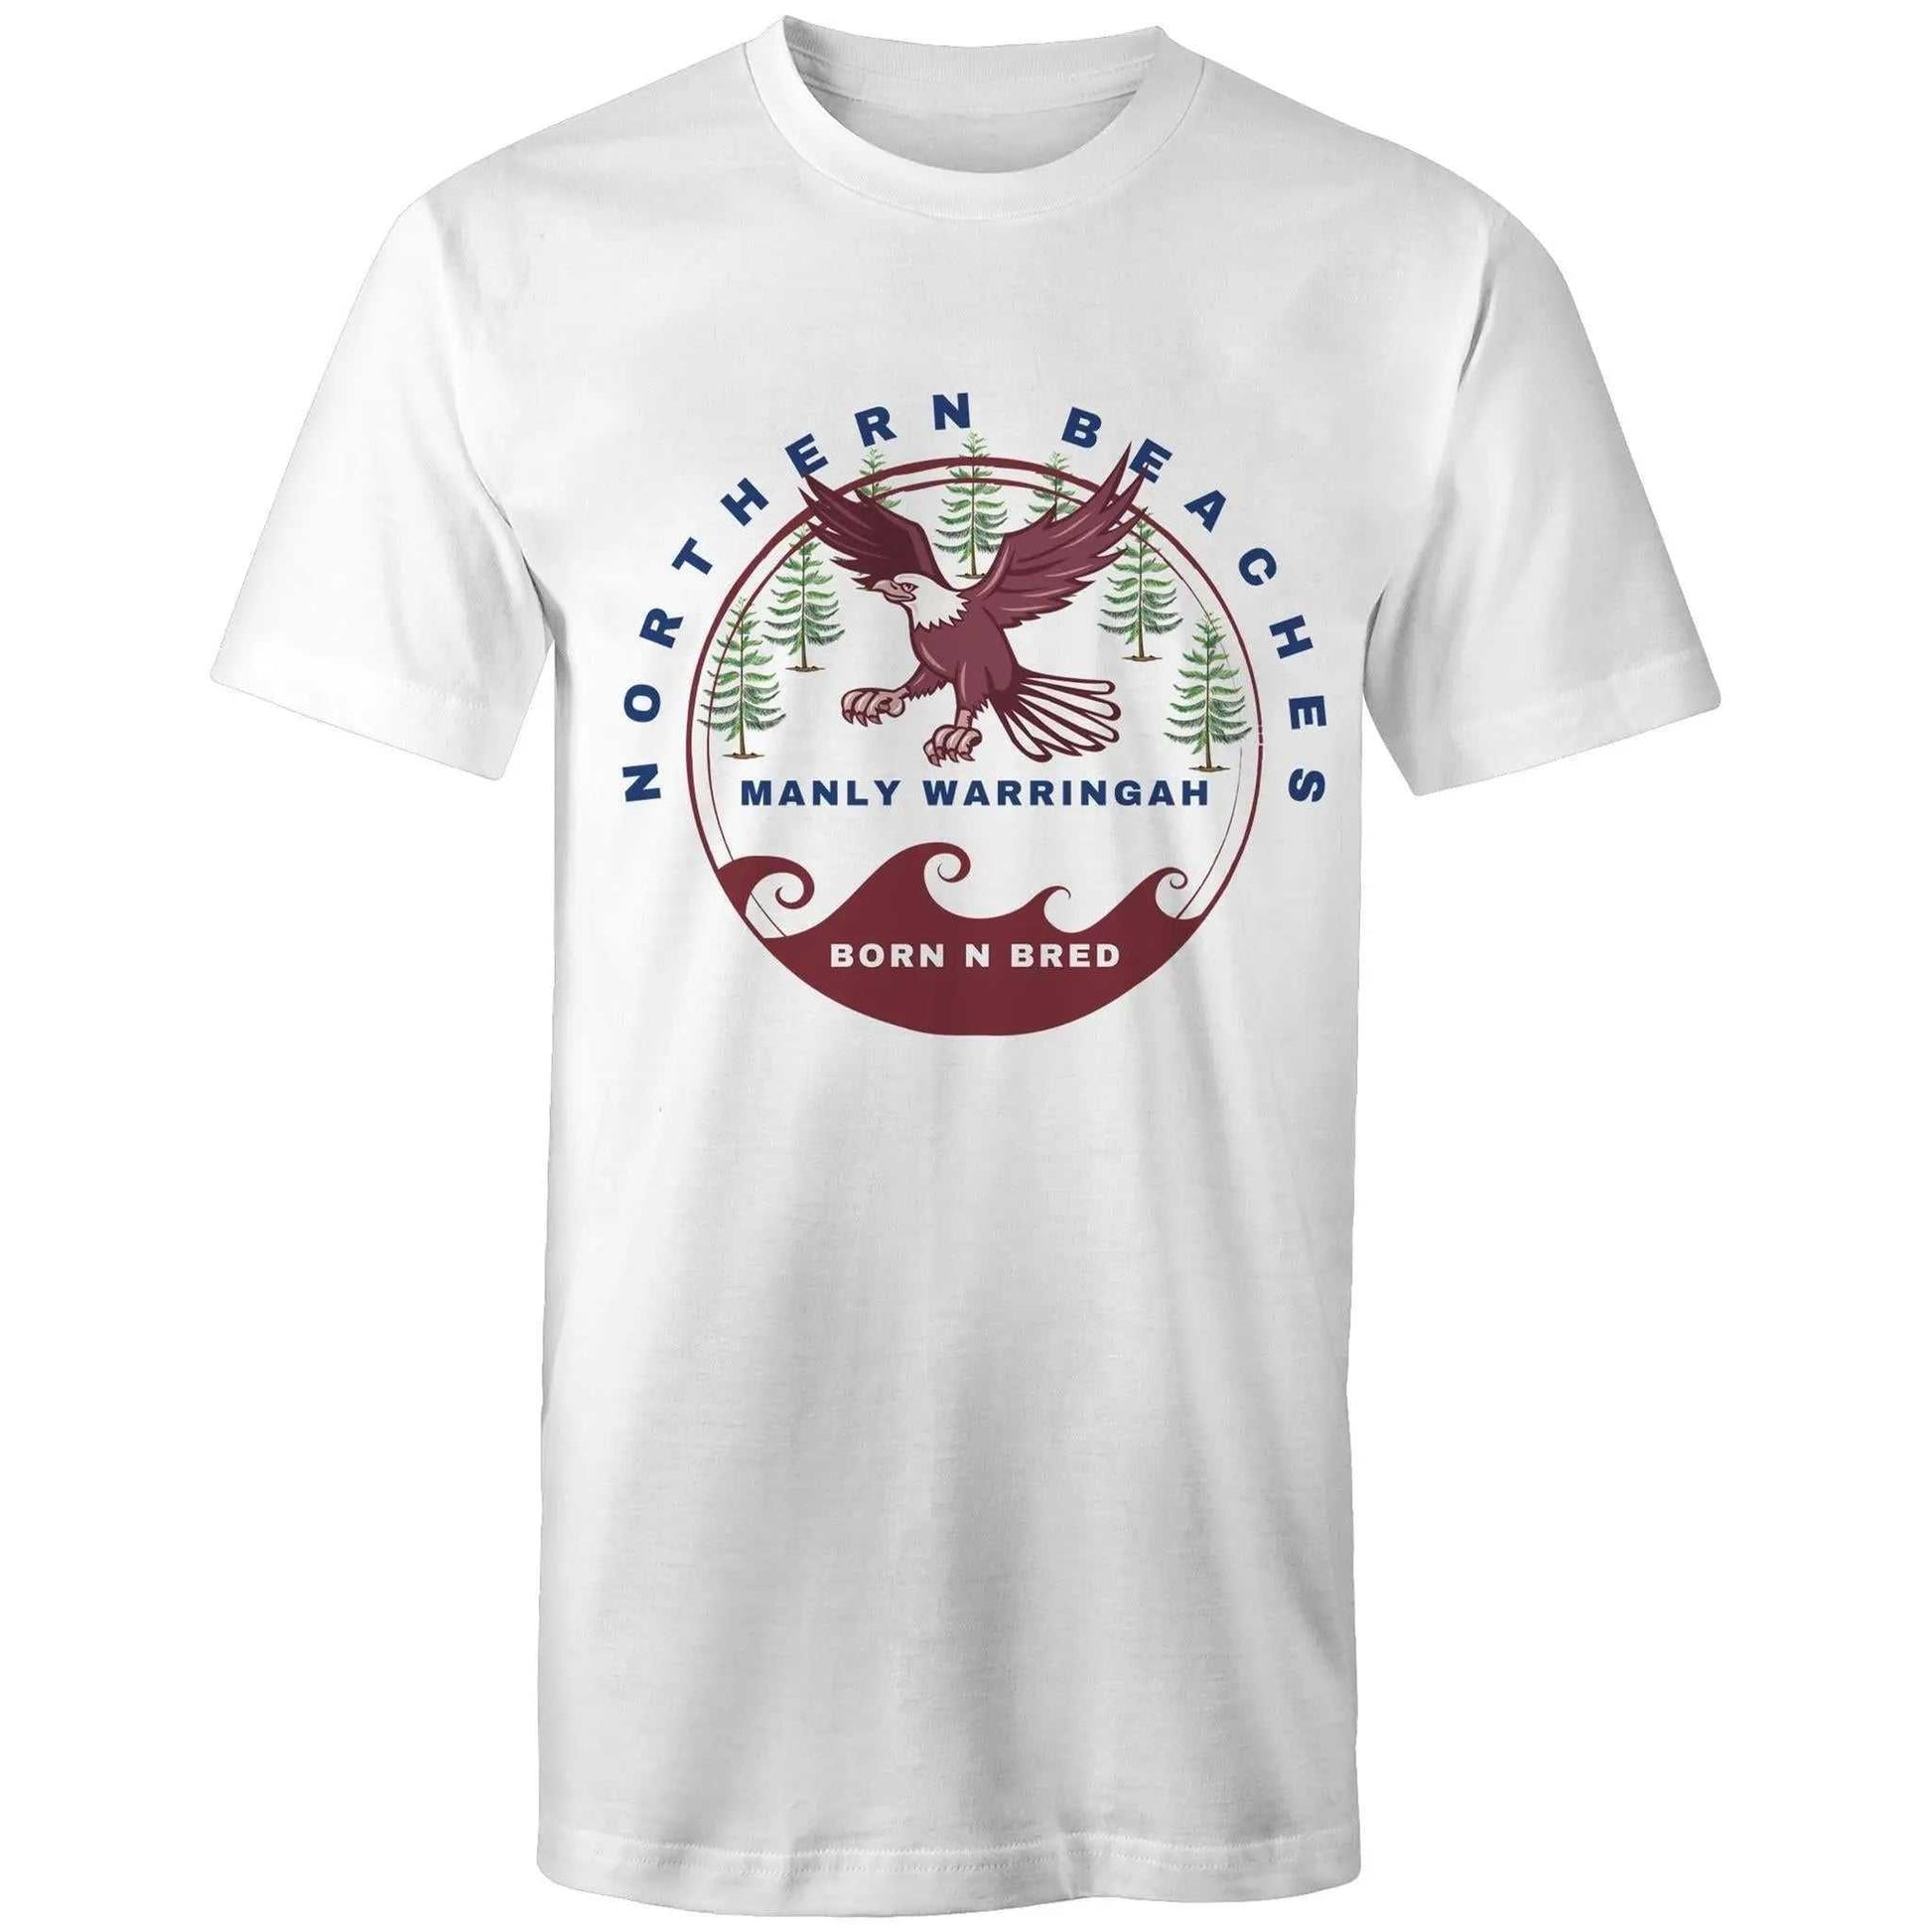 AS Colour - Tall Tee T-Shirt Northern Beaches Manly Warringah BornNBred Navy Font